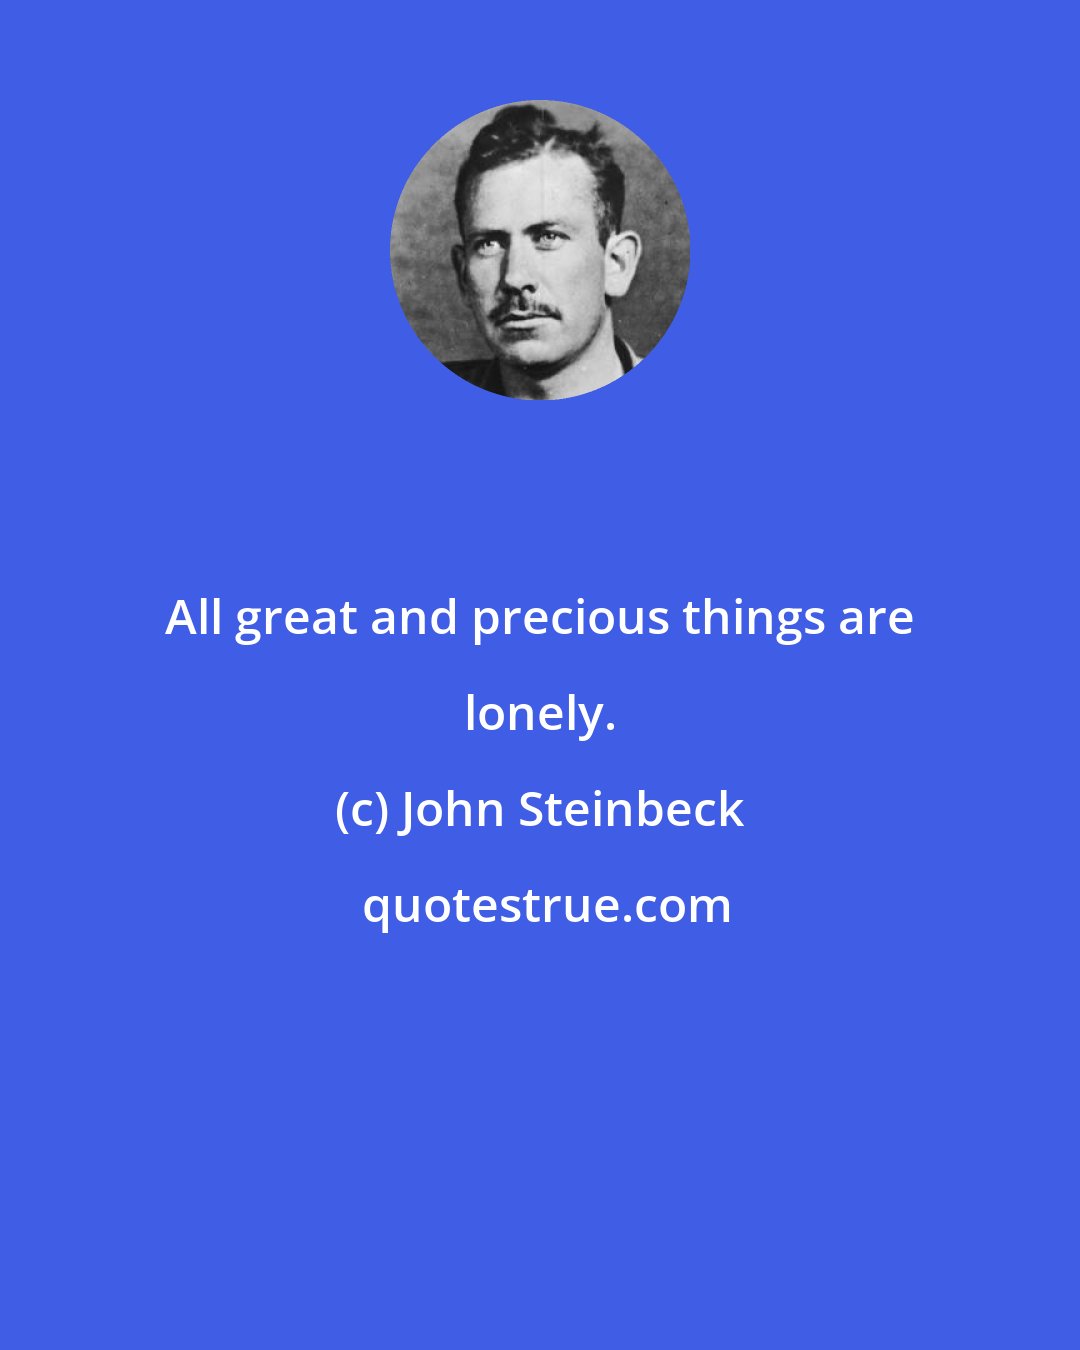 John Steinbeck: All great and precious things are lonely.